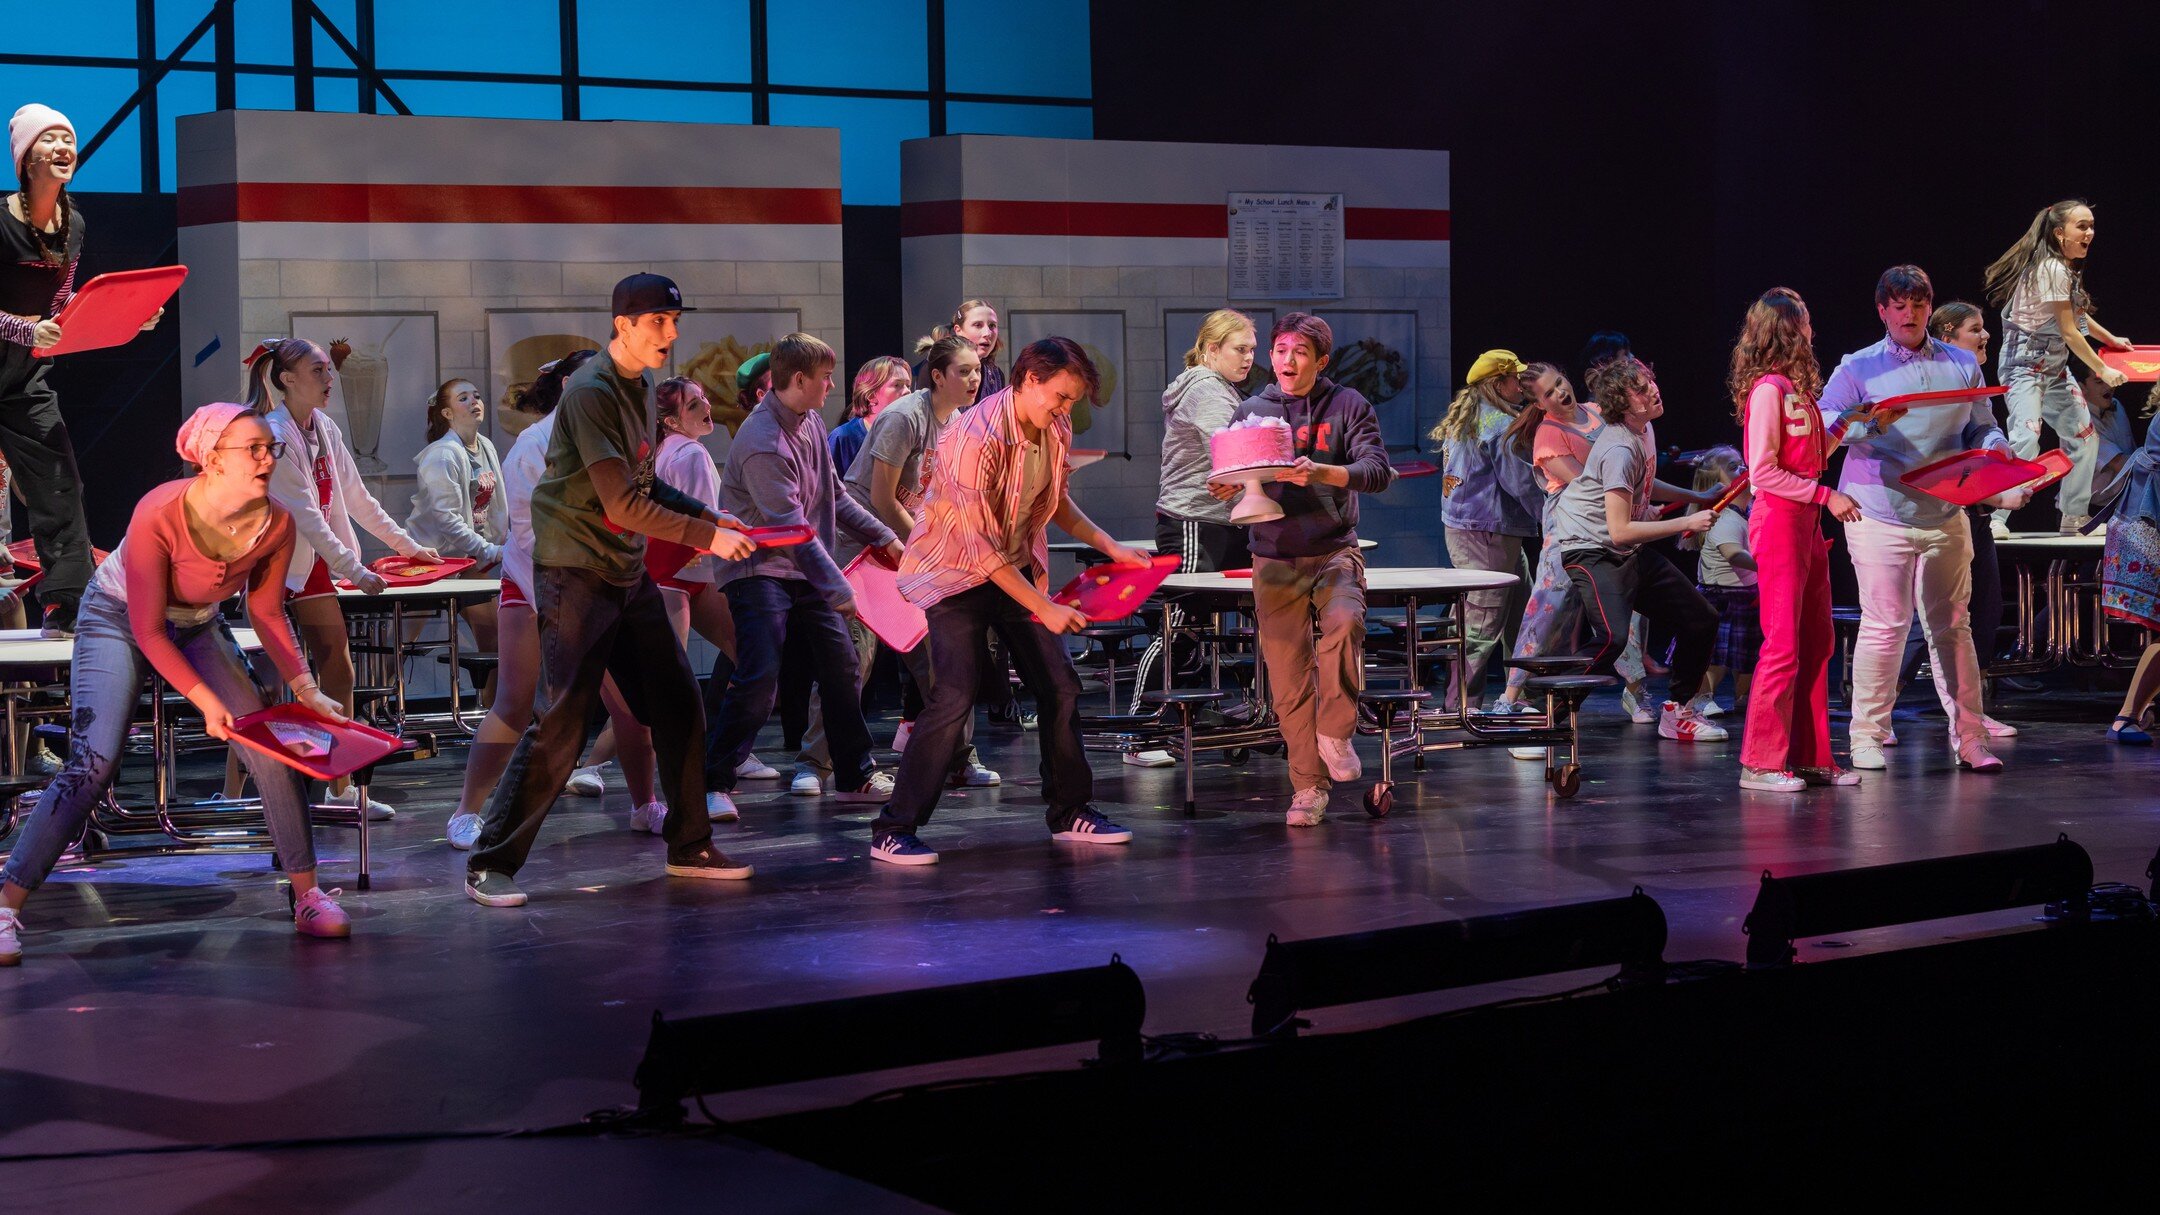 Disney's High School Musical on Stage is powerful story about being true to yourself, ignoring the status quo and breaking down cliques to work together There are three more chances to see this production Friday, 3/15 @ 7pm; Saturday, 3/16 @ 7pm; Sun